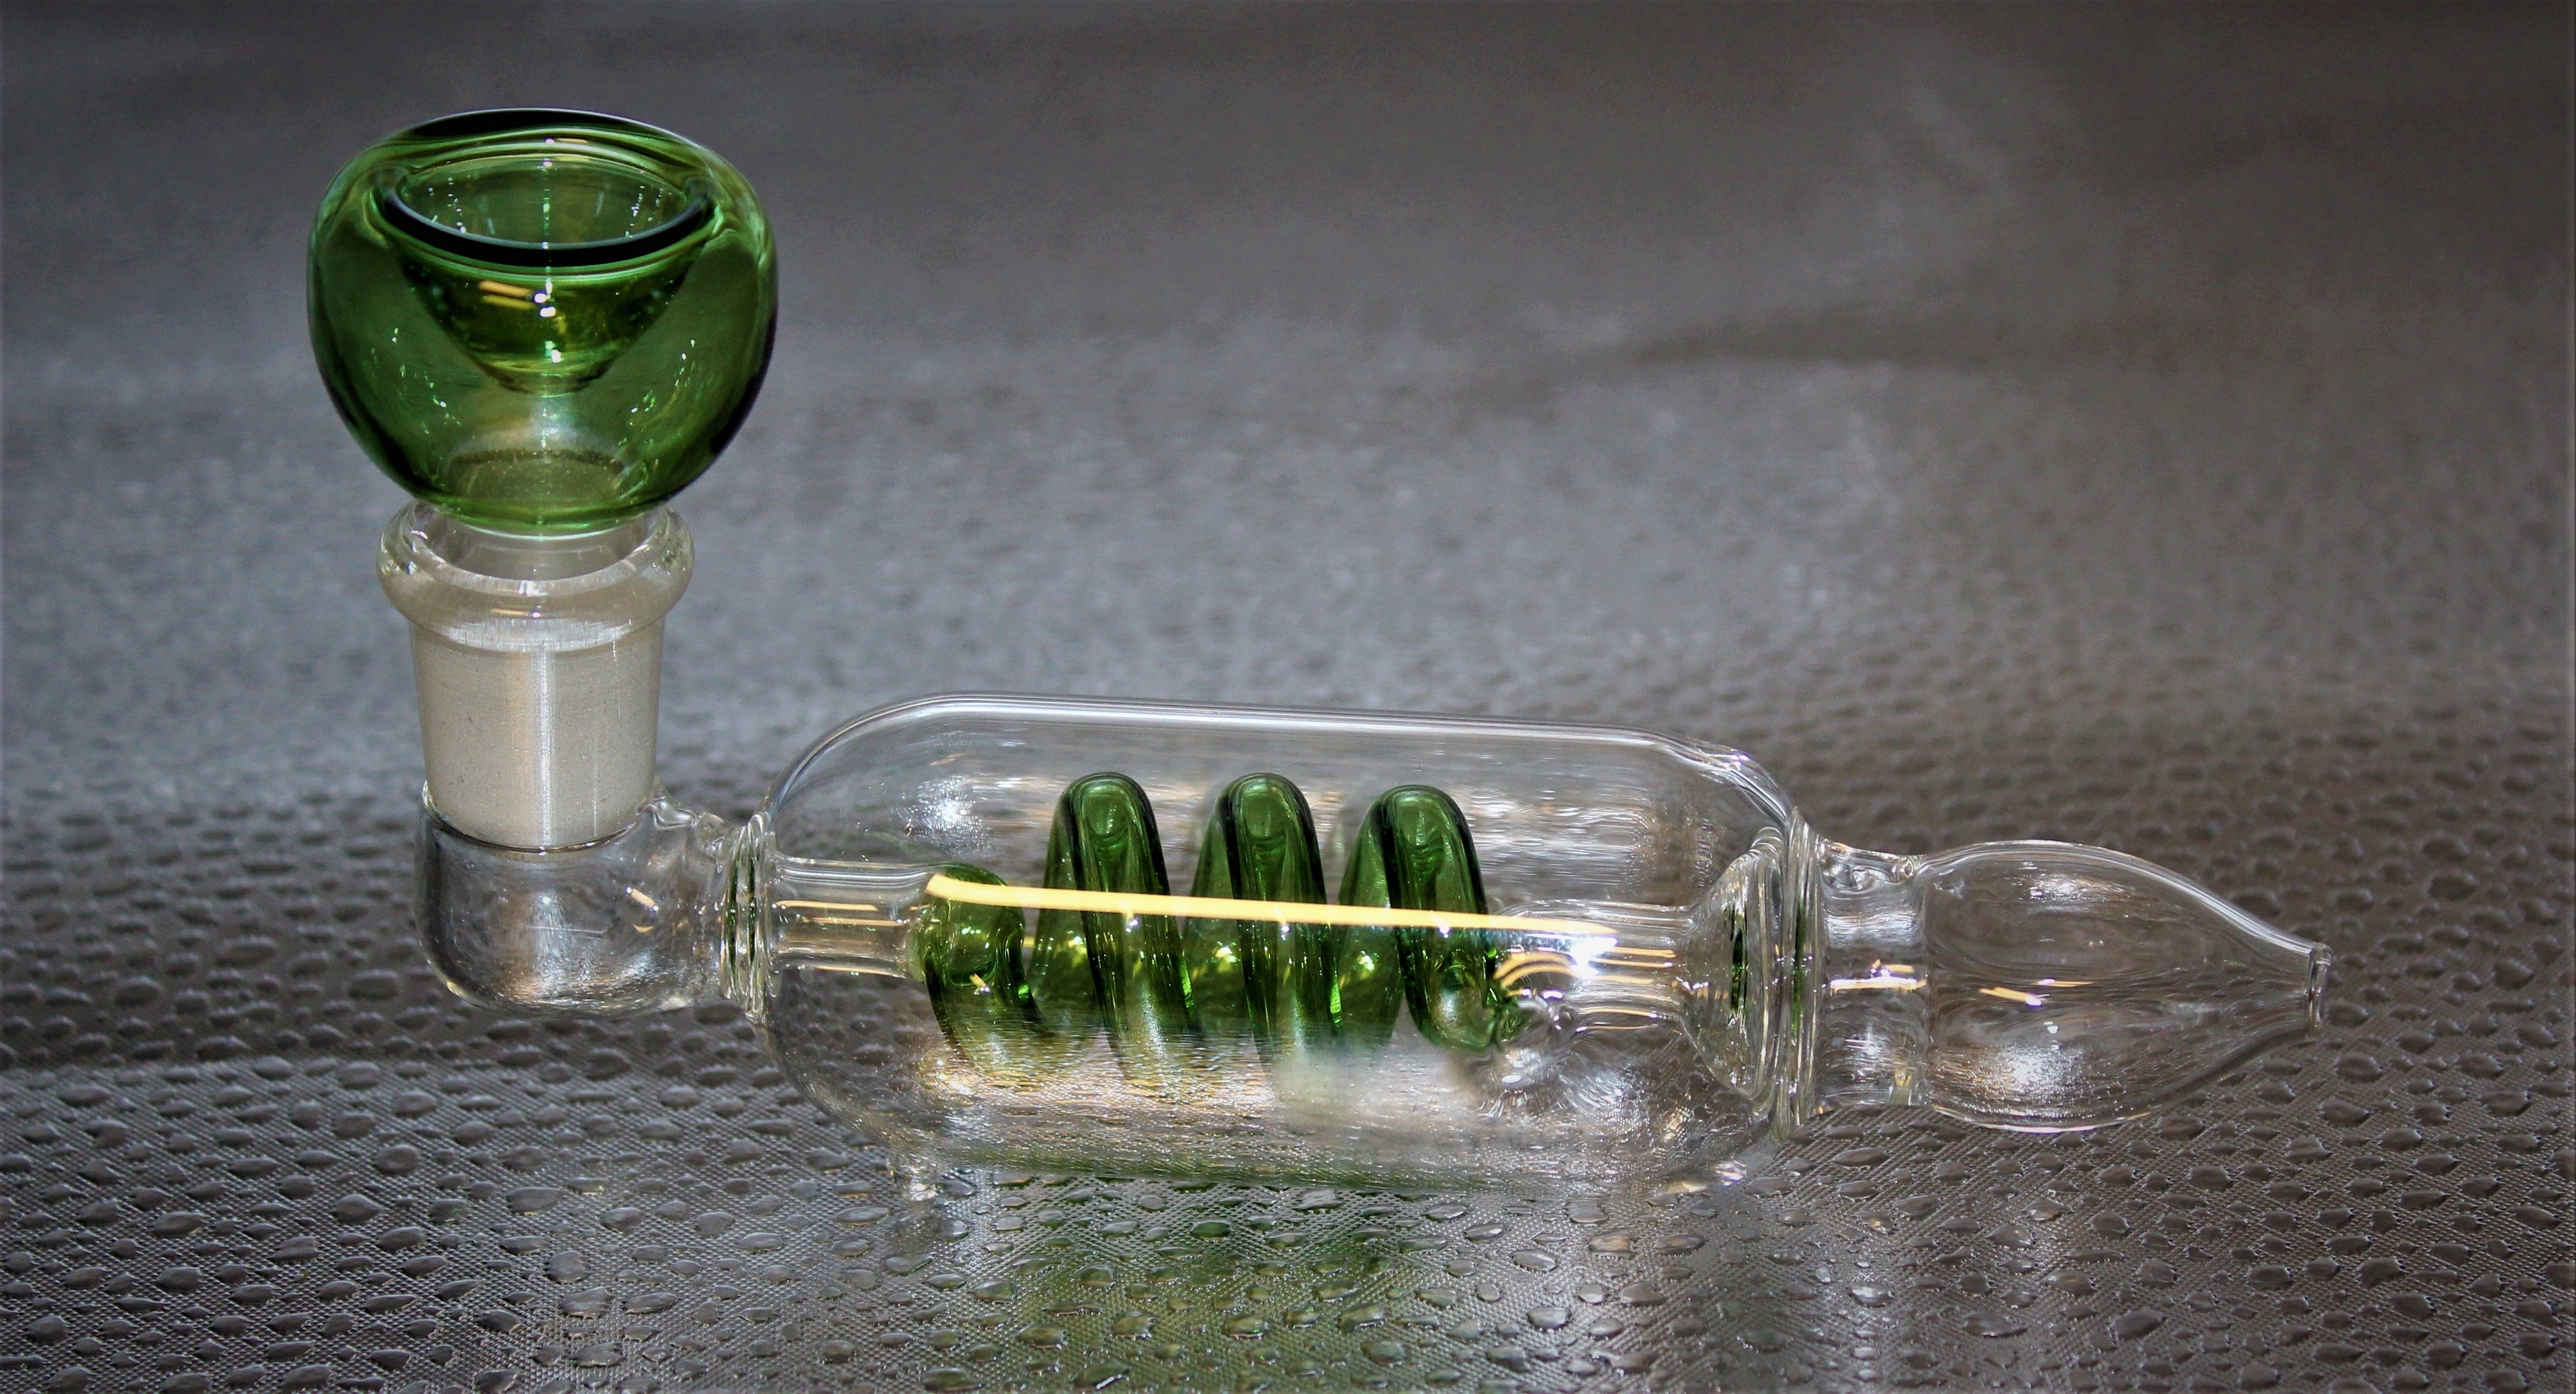 5" GREEN GLASS COIL TUBE Glass Smoking Pipe